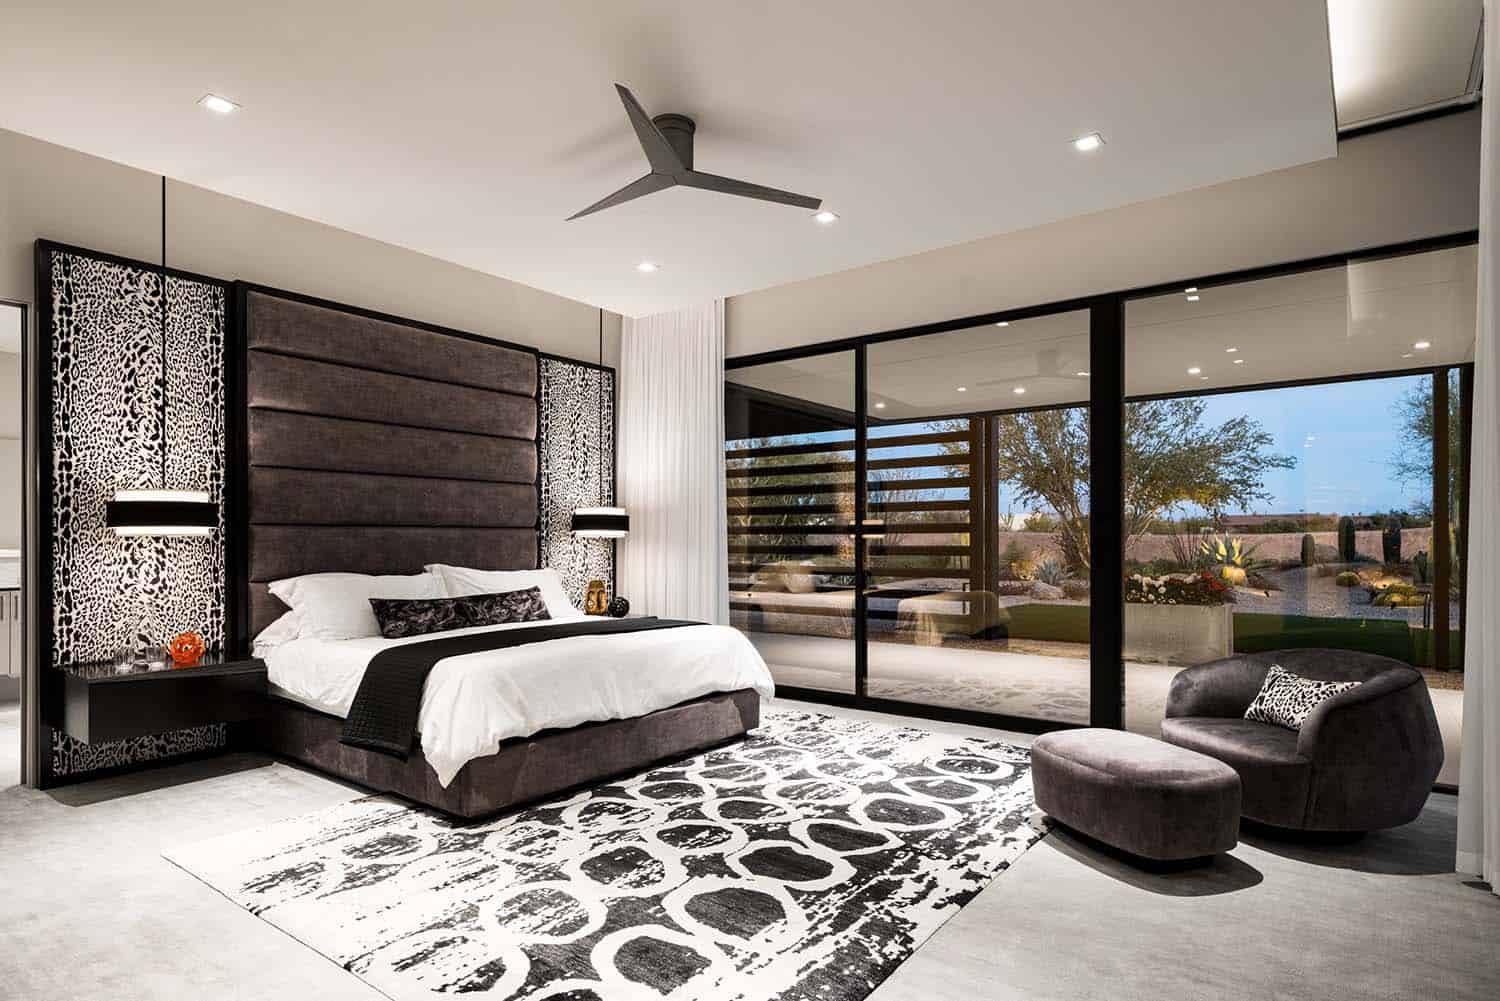 modern bedroom with sliding glass doors leading out to the backyard patio